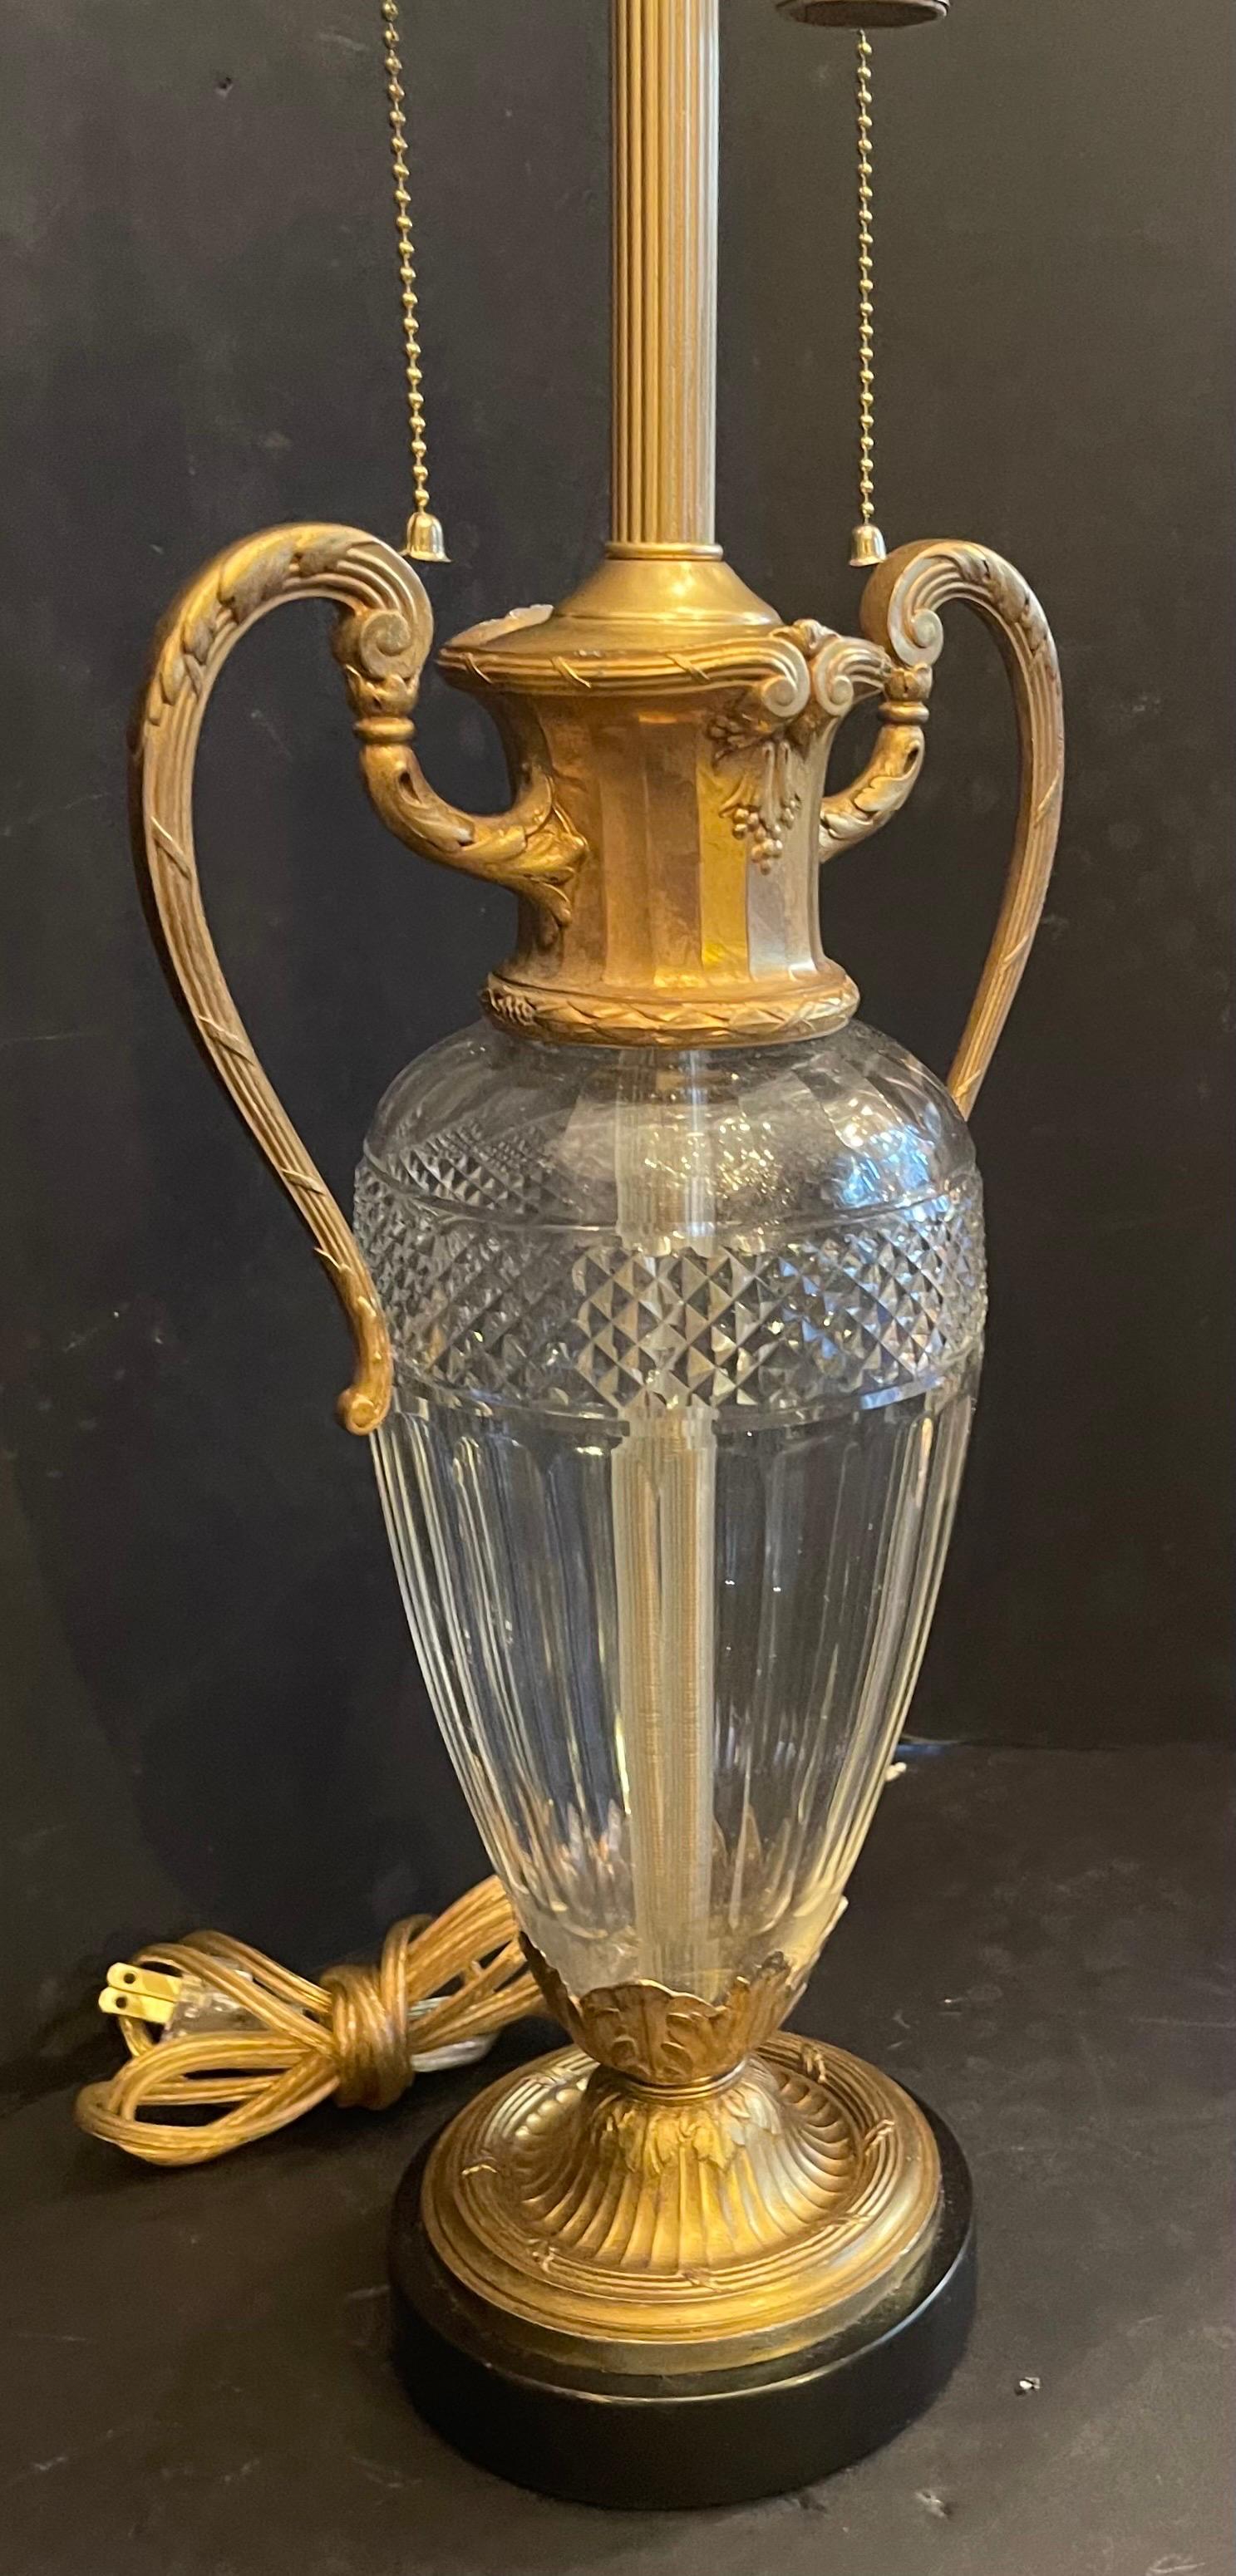 Wonderful Pair French Gilt Dore Bronze Cut Crystal Urn Form Ormolu-Mounted Lamps In Good Condition For Sale In Roslyn, NY